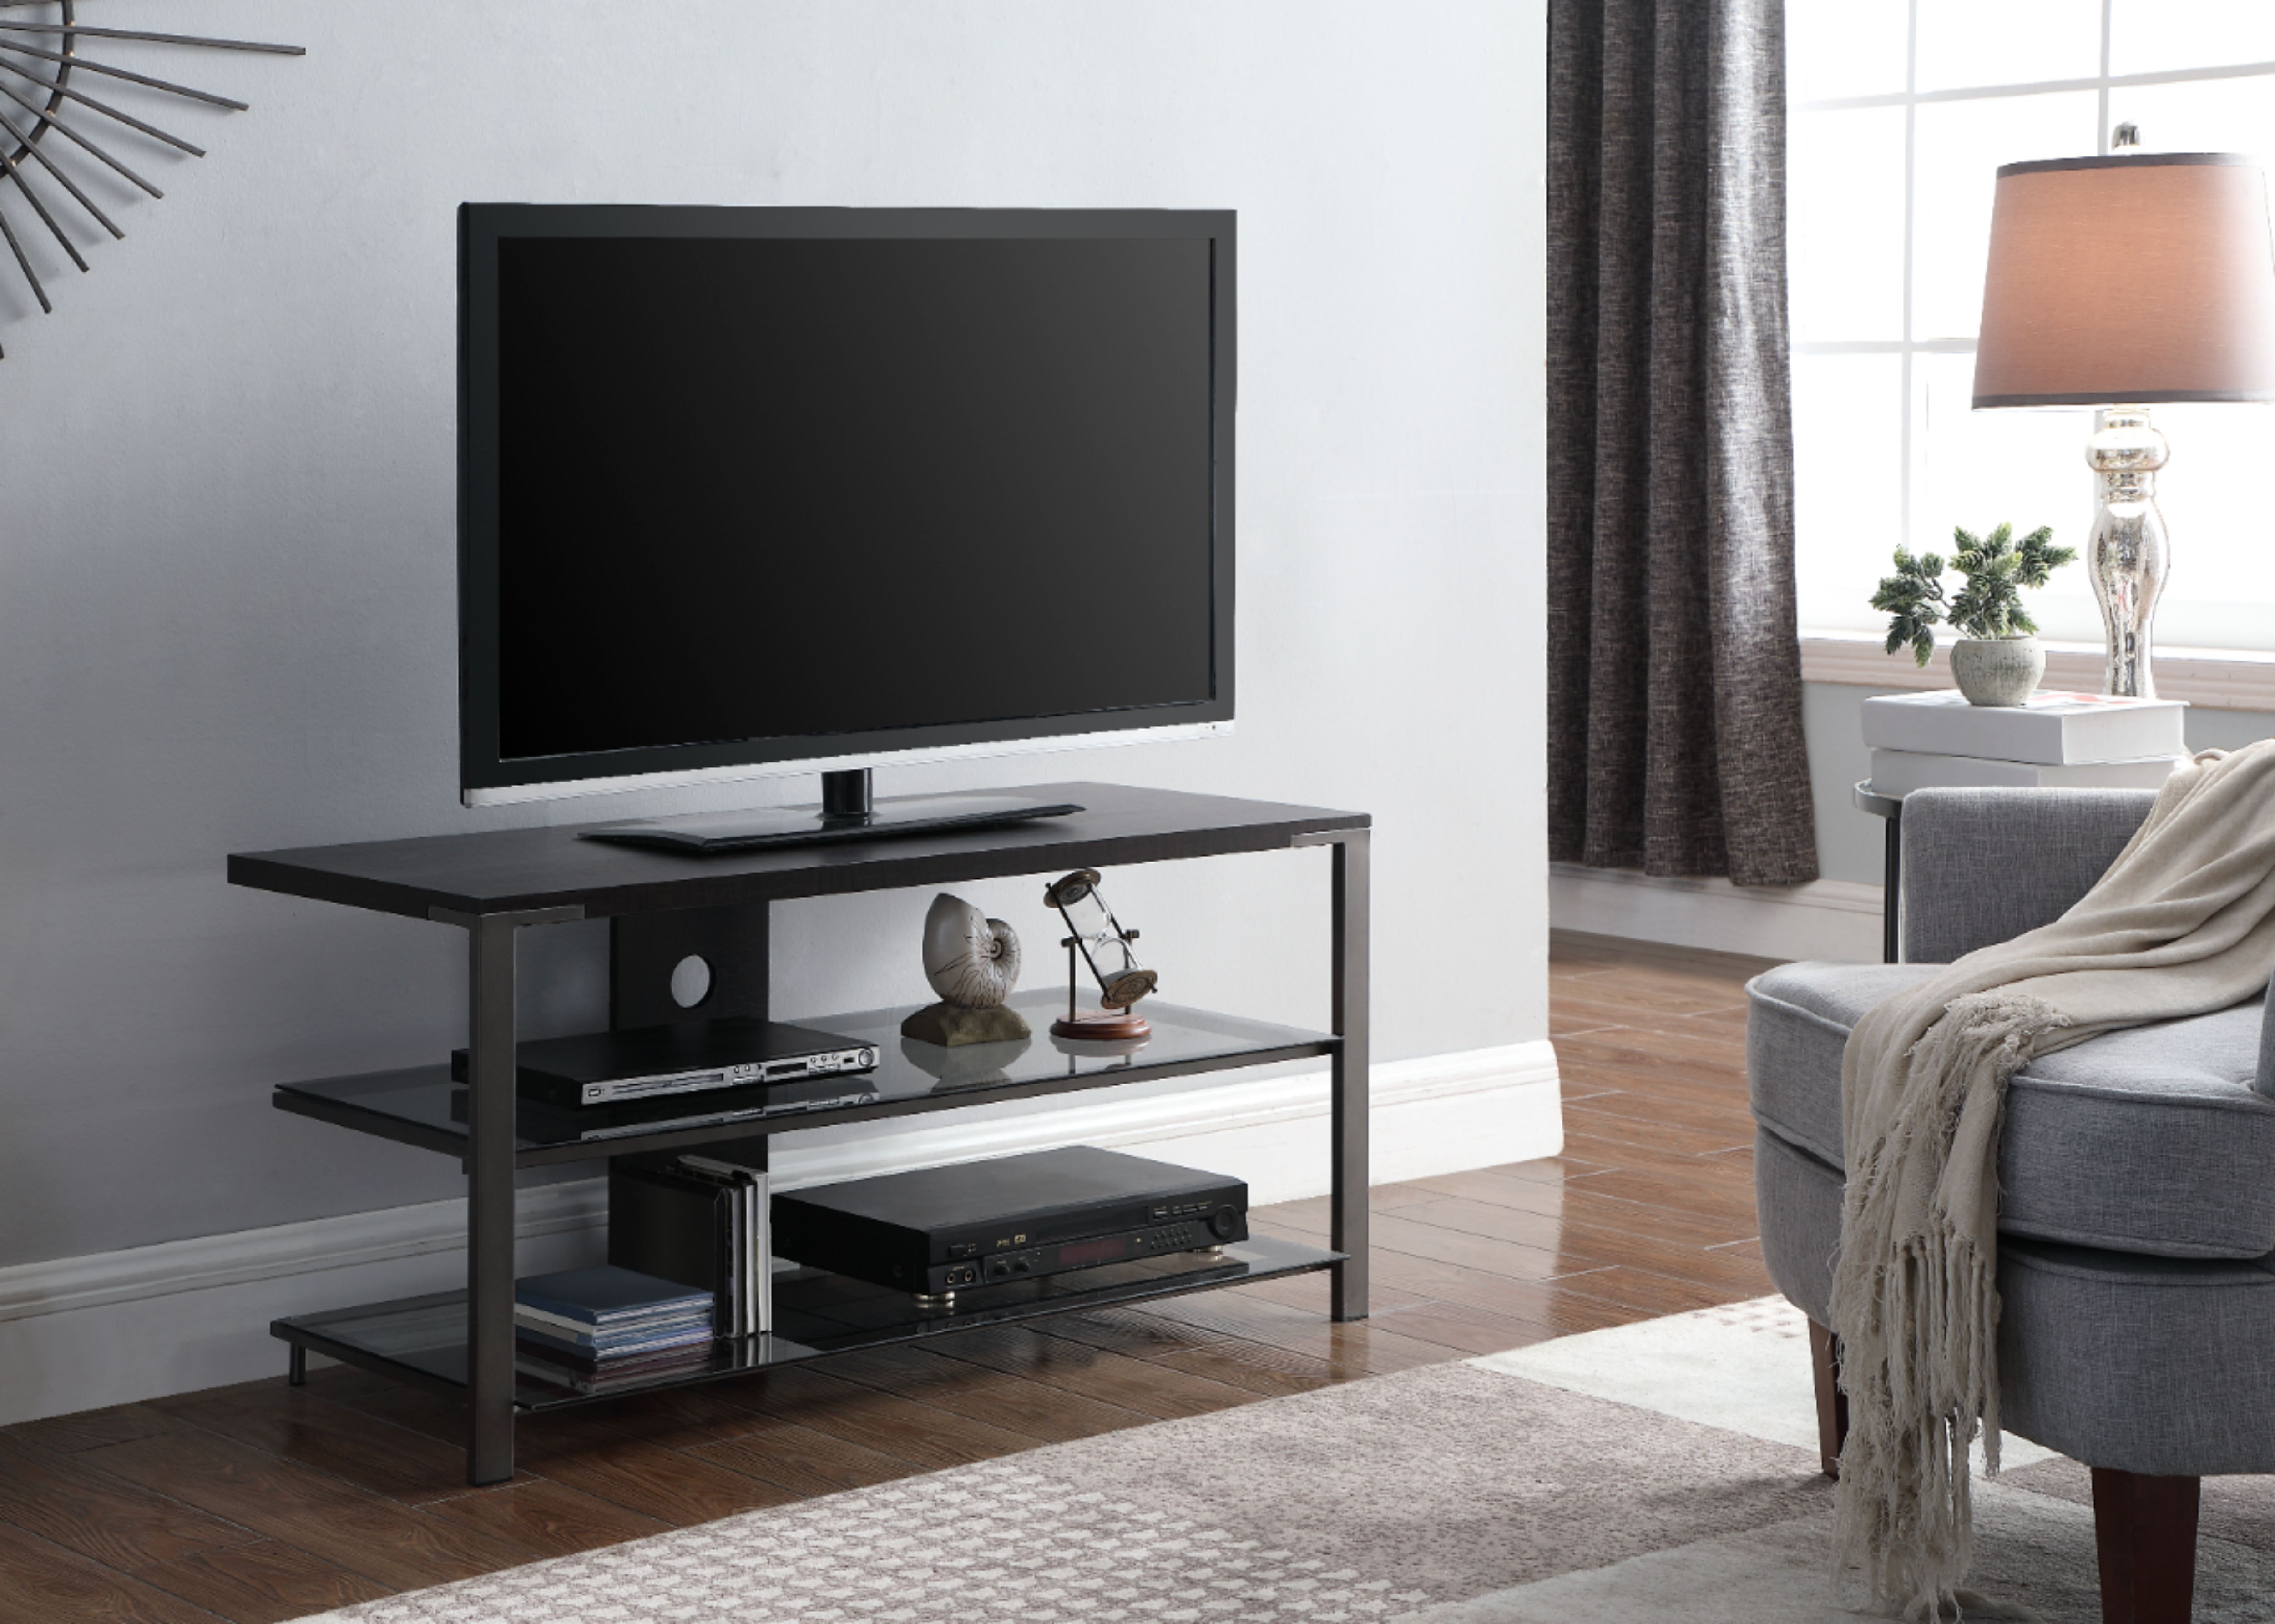 Should I get a 45-inch TV or 55-inch TV? –